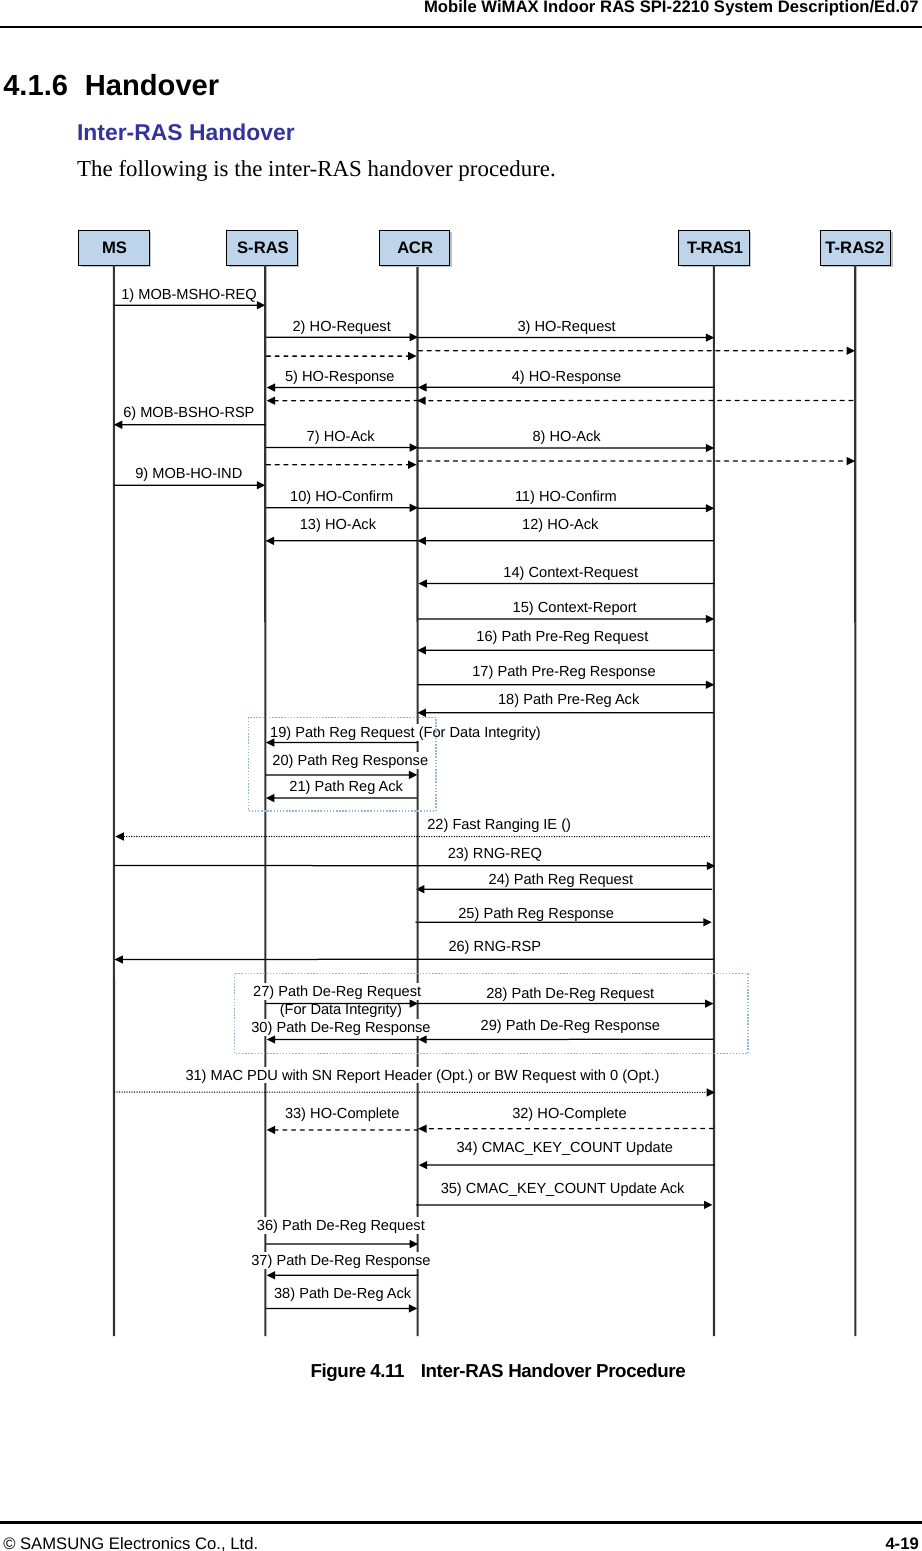   Mobile WiMAX Indoor RAS SPI-2210 System Description/Ed.07 © SAMSUNG Electronics Co., Ltd.  4-19 4.1.6 Handover Inter-RAS Handover The following is the inter-RAS handover procedure.    Figure 4.11    Inter-RAS Handover Procedure 25) Path Reg Response 24) Path Reg Request 21) Path Reg Ack MS  S-RAS  T-RAS1  T-RAS21) MOB-MSHO-REQ ACR2) HO-Request  3) HO-Request 4) HO-Response5) HO-Response7) HO-Ack 9) MOB-HO-IND 10) HO-Confirm 14) Context-Request15) Context-Report12) HO-Ack 13) HO-Ack 23) RNG-REQ 26) RNG-RSP 31) MAC PDU with SN Report Header (Opt.) or BW Request with 0 (Opt.) 32) HO-Complete 33) HO-Complete 36) Path De-Reg Request37) Path De-Reg Response6) MOB-BSHO-RSP 8) HO-Ack 11) HO-Confirm 16) Path Pre-Reg Request19) Path Reg Request (For Data Integrity)20) Path Reg Response 17) Path Pre-Reg Response18) Path Pre-Reg Ack 27) Path De-Reg Request    (For Data Integrity)  30) Path De-Reg Response28) Path De-Reg Request29) Path De-Reg Response22) Fast Ranging IE () 34) CMAC_KEY_COUNT Update35) CMAC_KEY_COUNT Update Ack 38) Path De-Reg Ack 